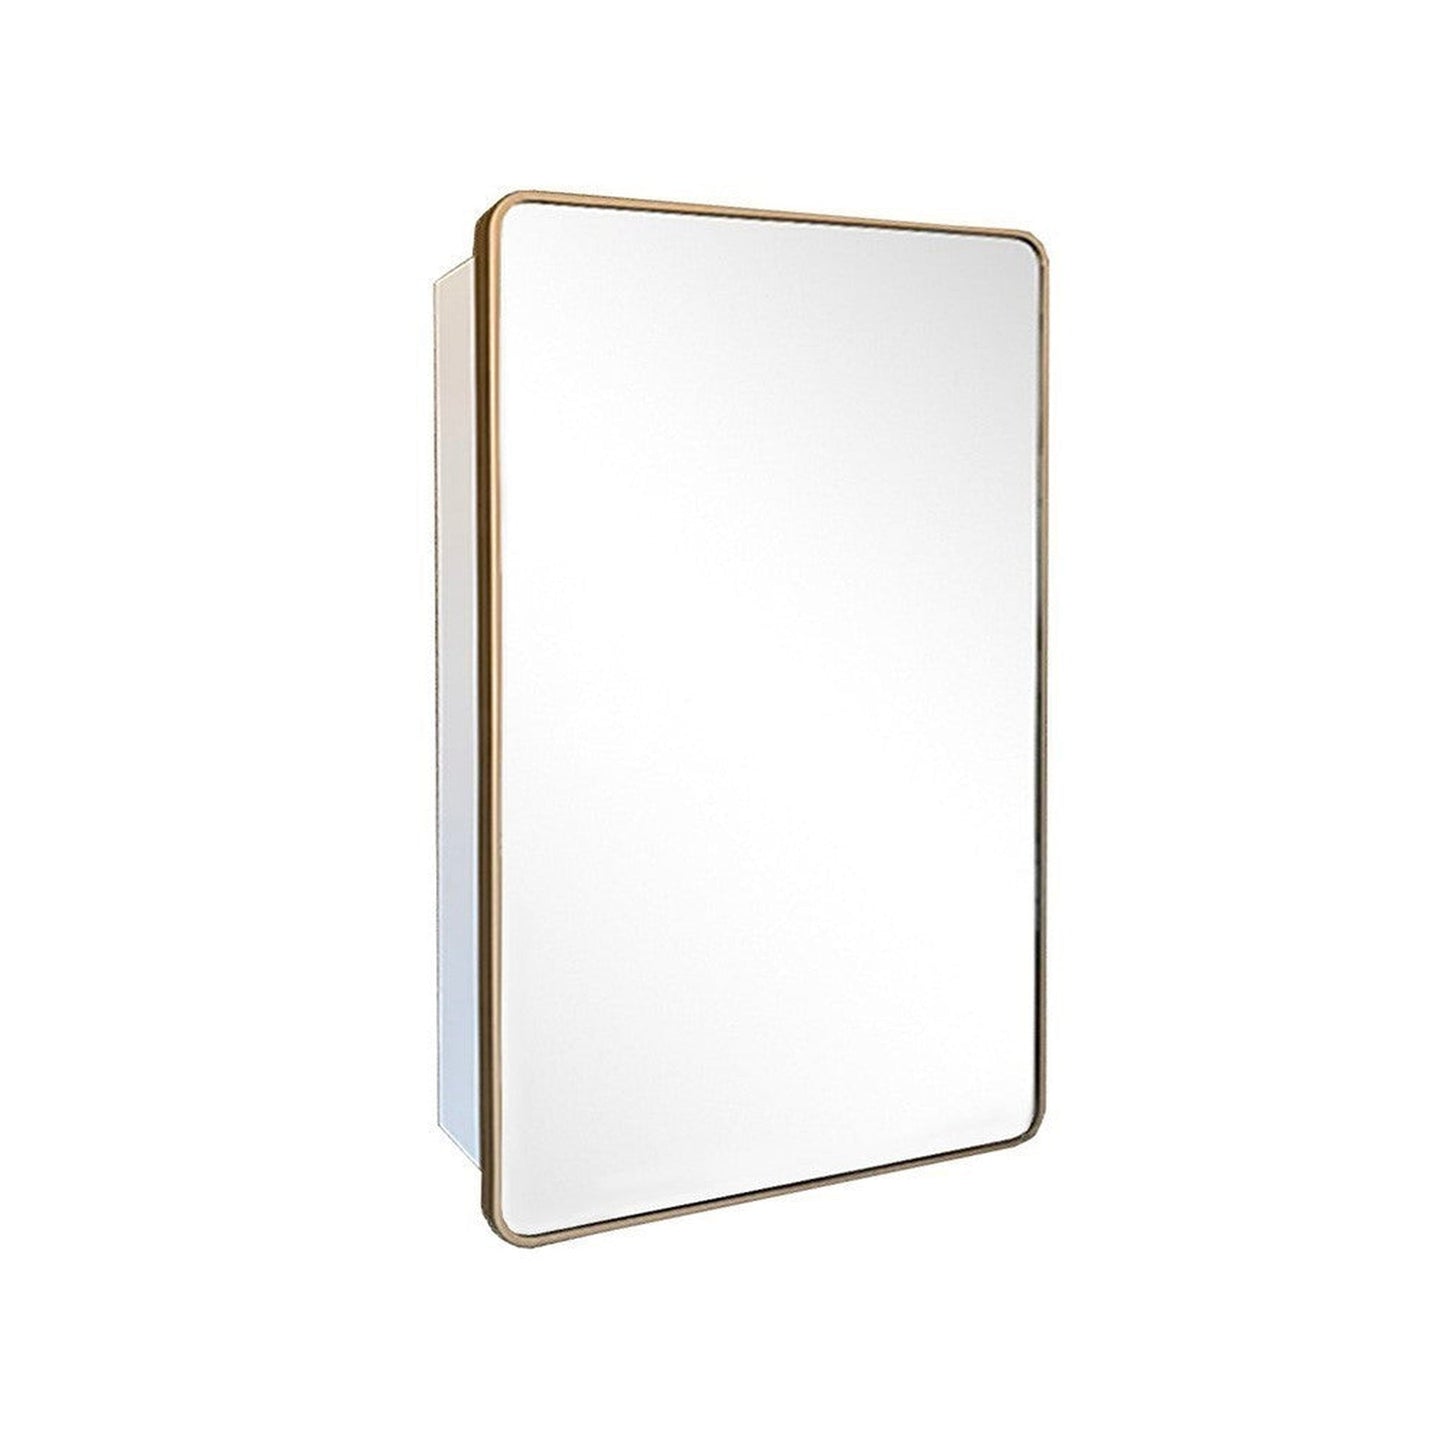 Bellaterra Home 29" x 18" Gold Rectangle Wall-Mounted Steel Framed Mirror Medicine Cabinet